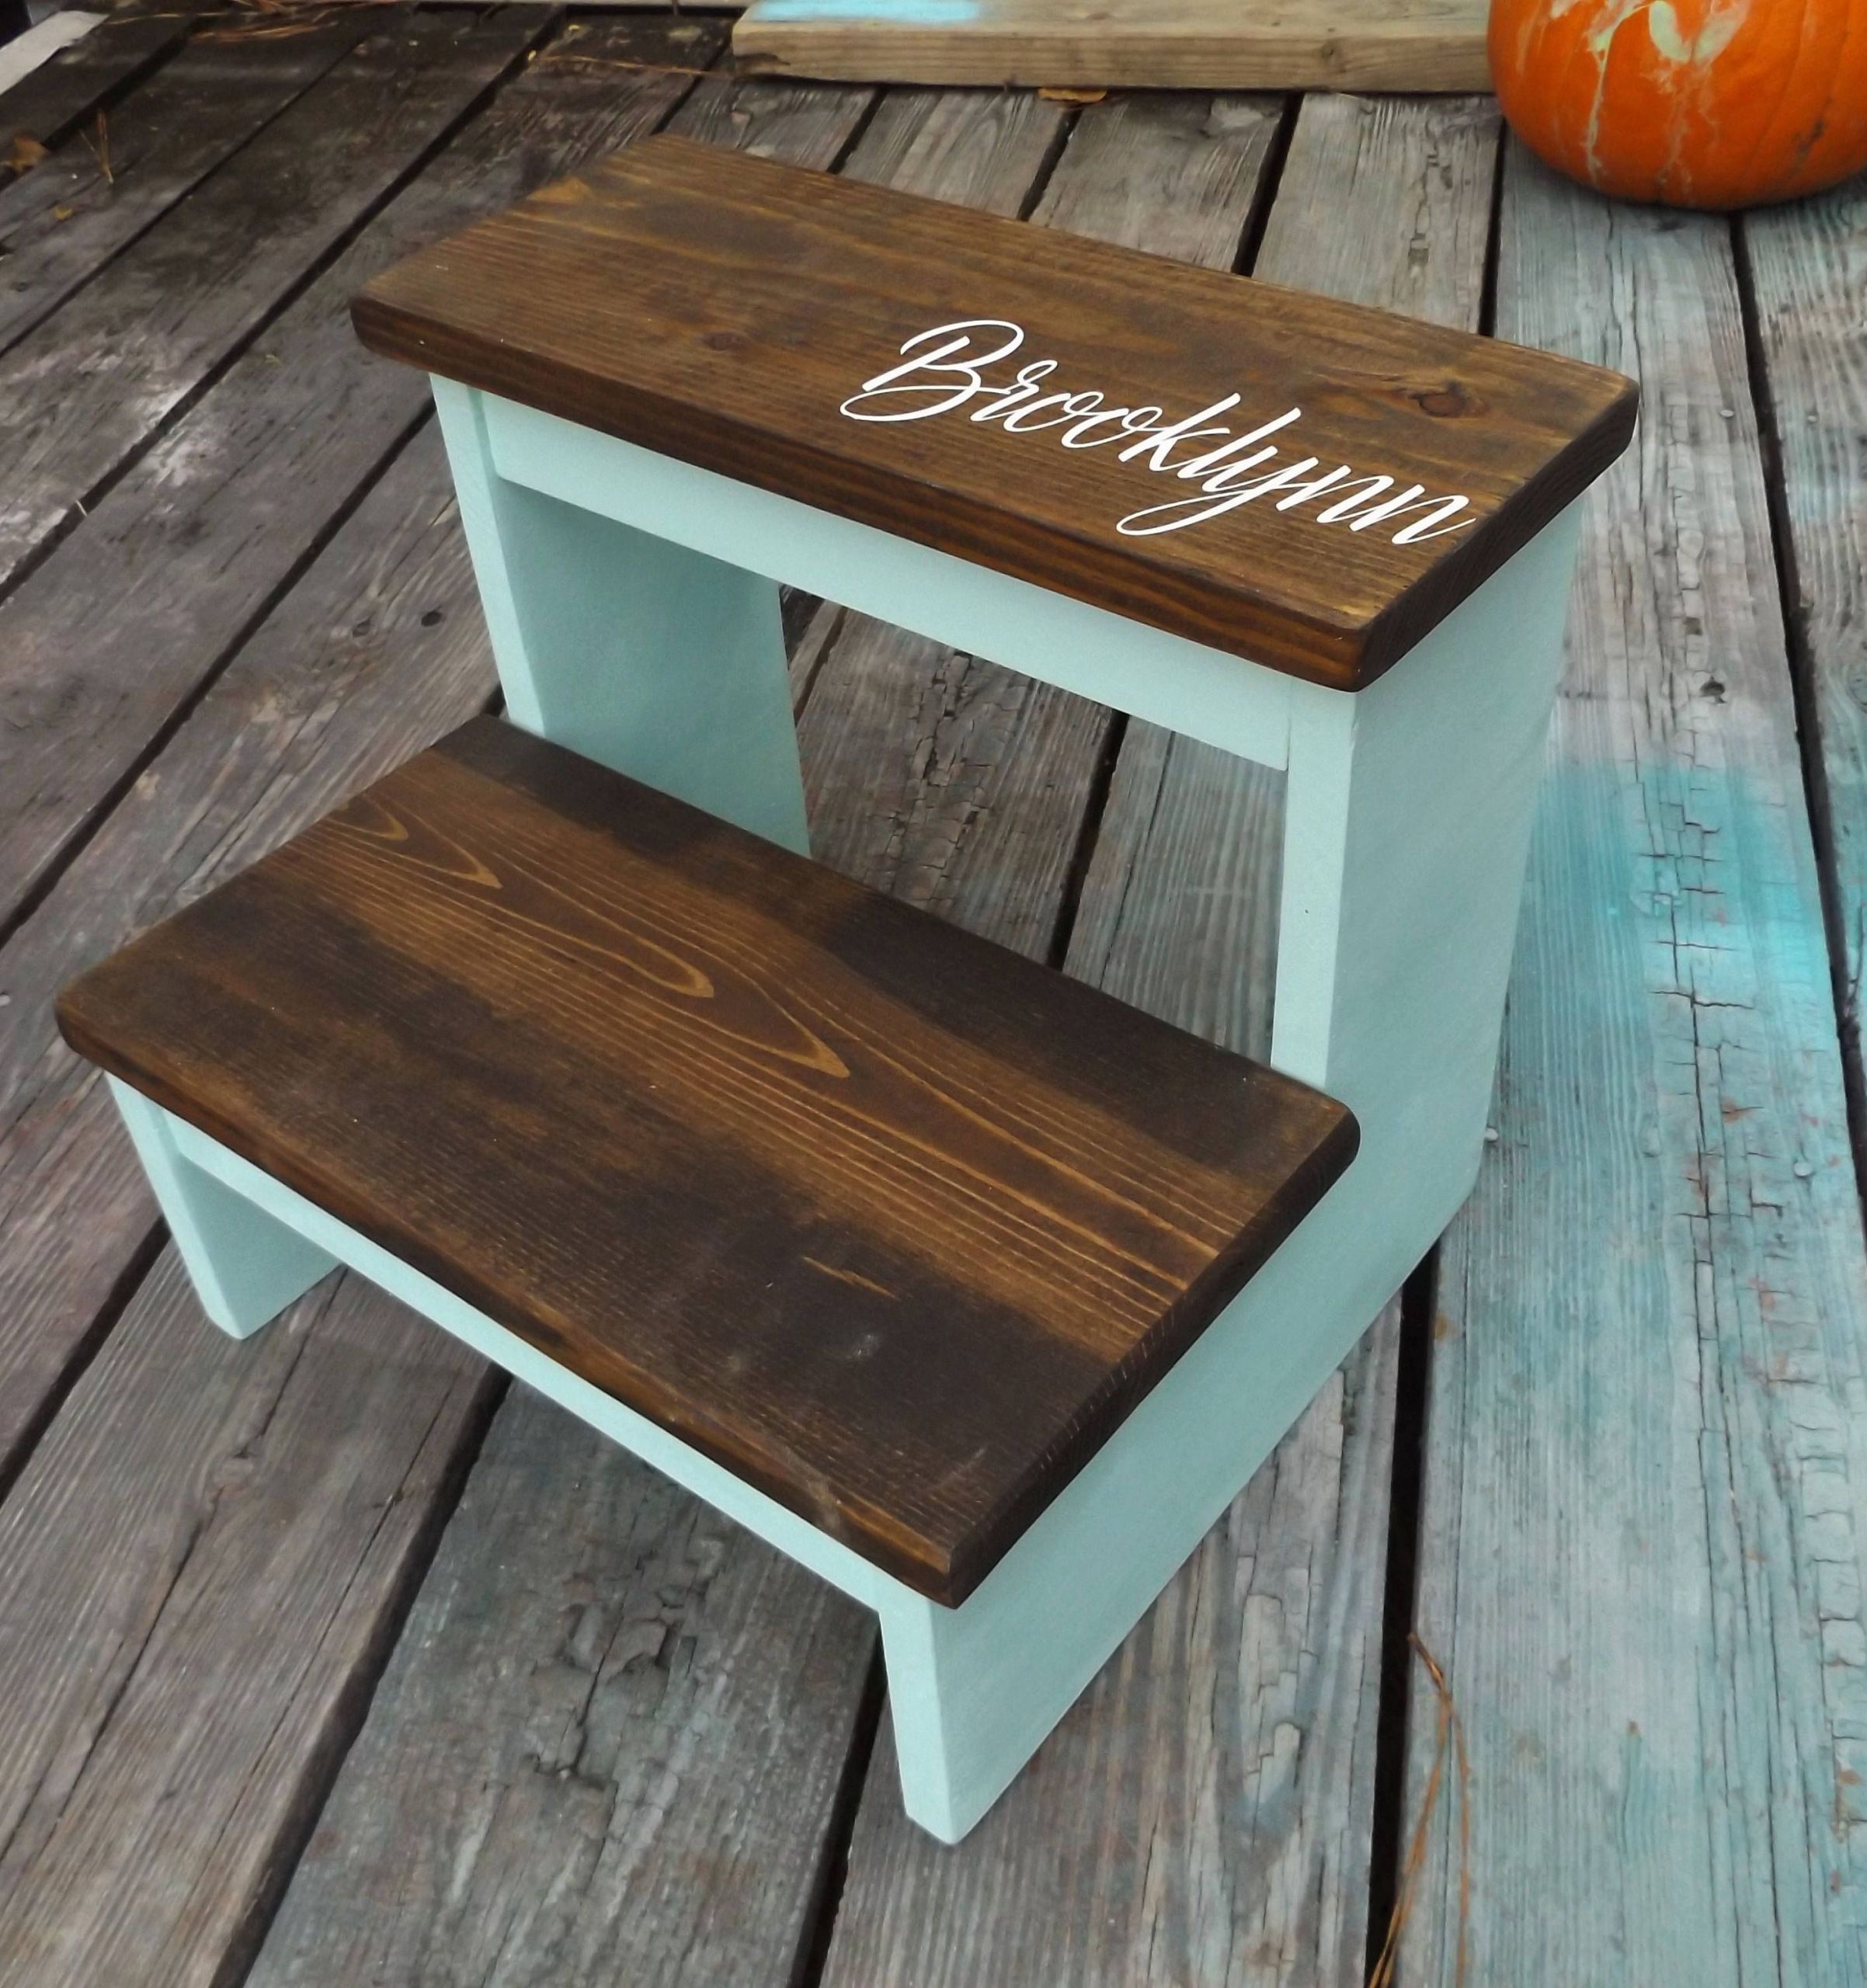 DIY Step Stool For Toddler
 step stool kids toddler wooden step stool personalized